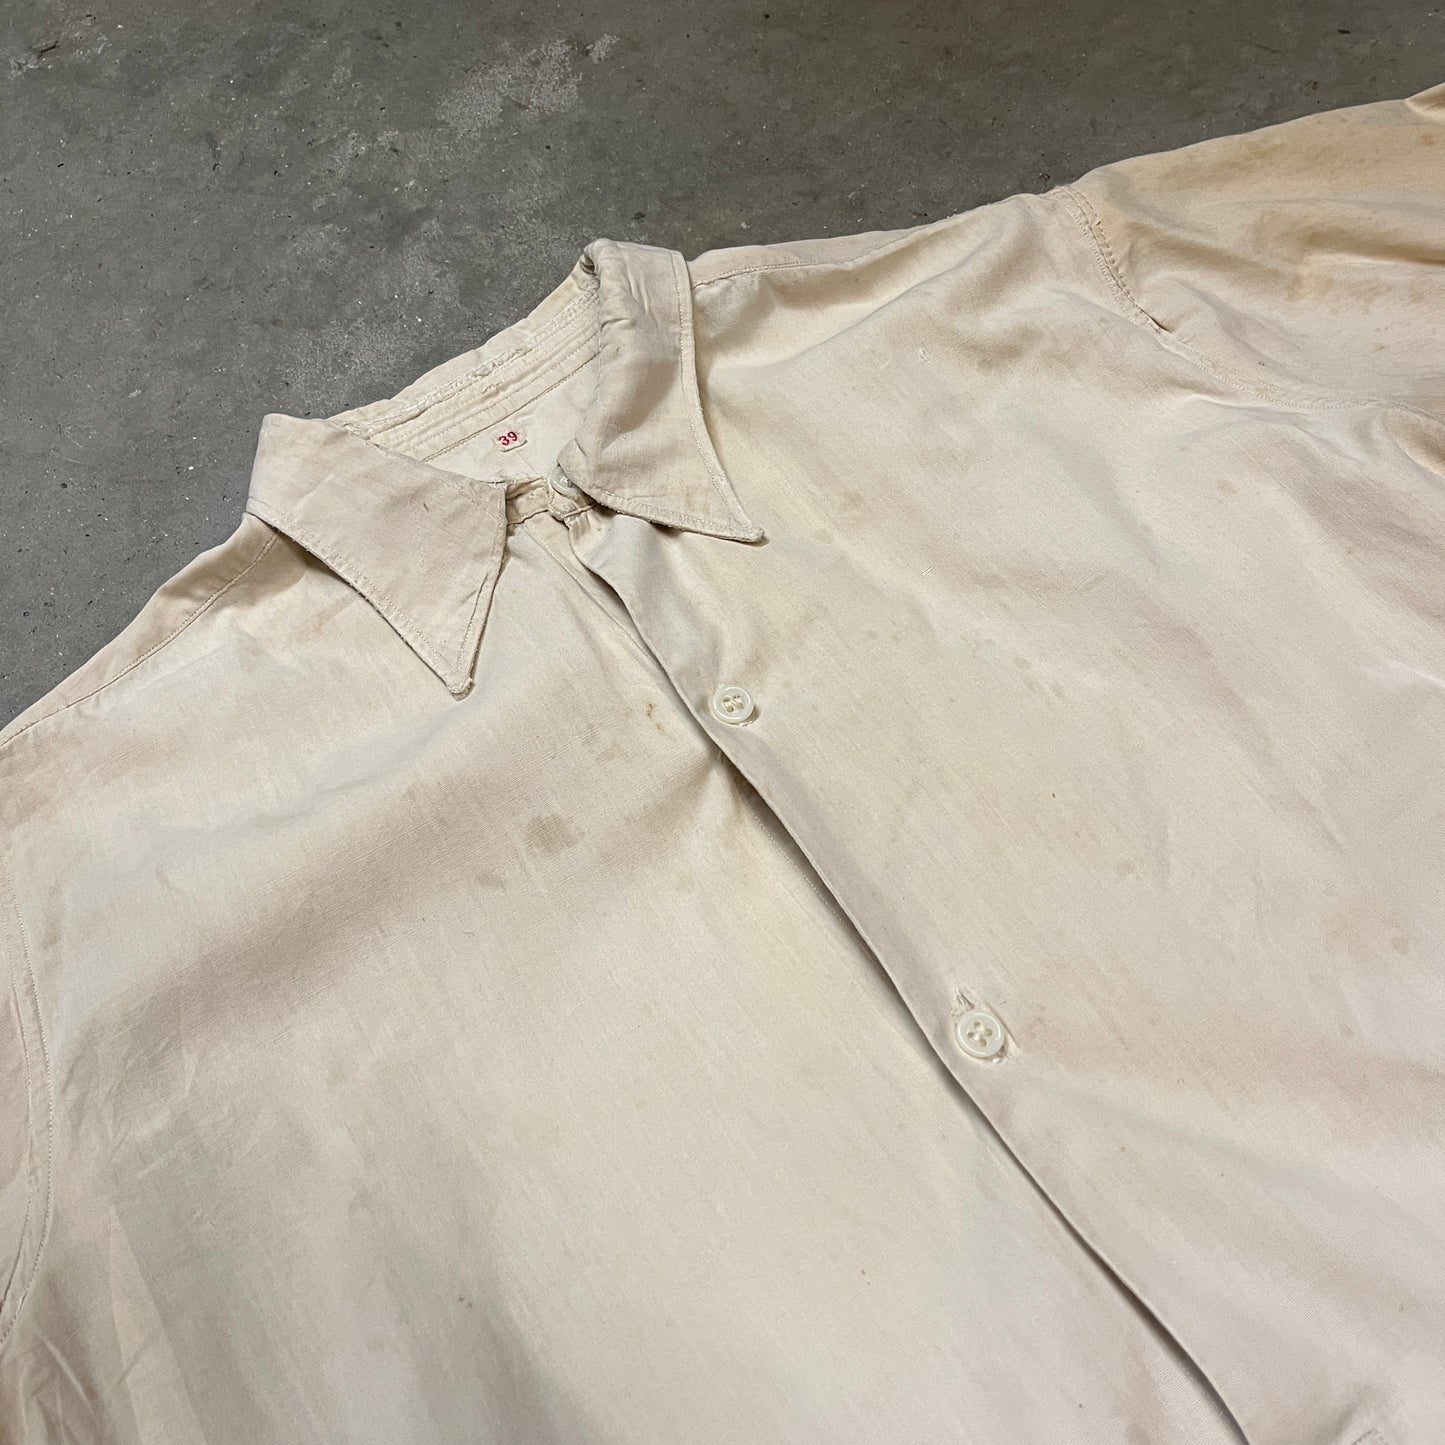 Distressed 1940s French Spearpoint Collar Shirt With Glass Buttons